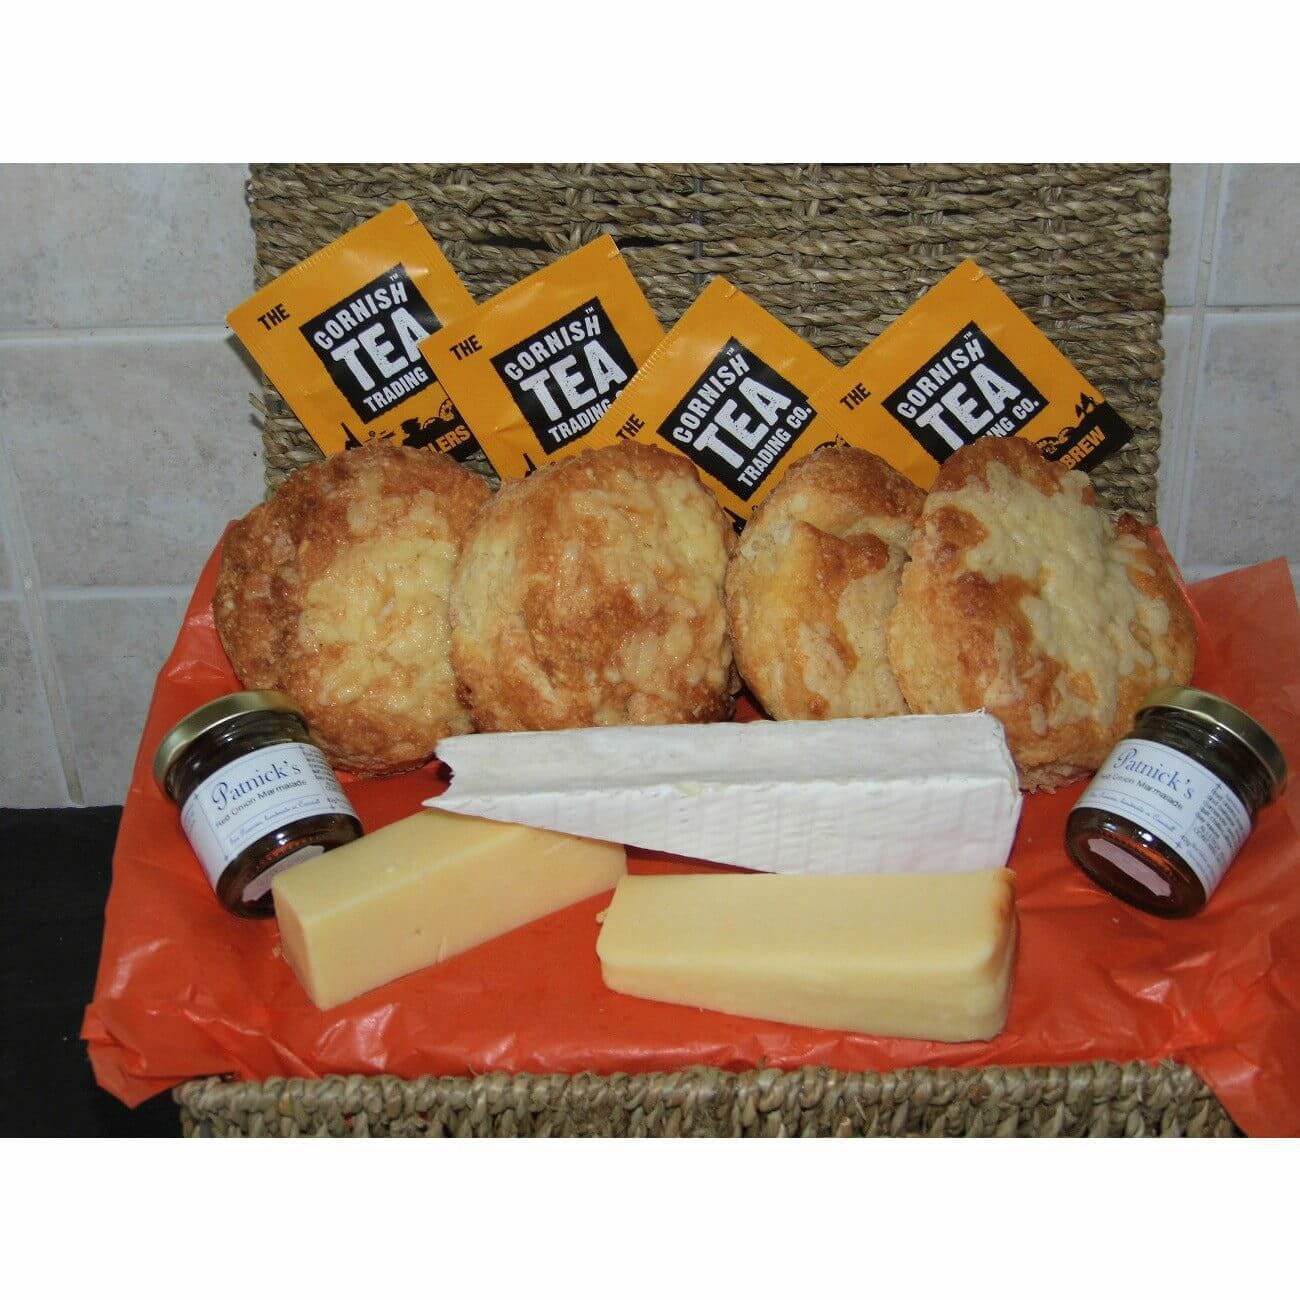 Gluten Free Savoury Afternoon Tea Hamper for Two - The Cornish Scone Company